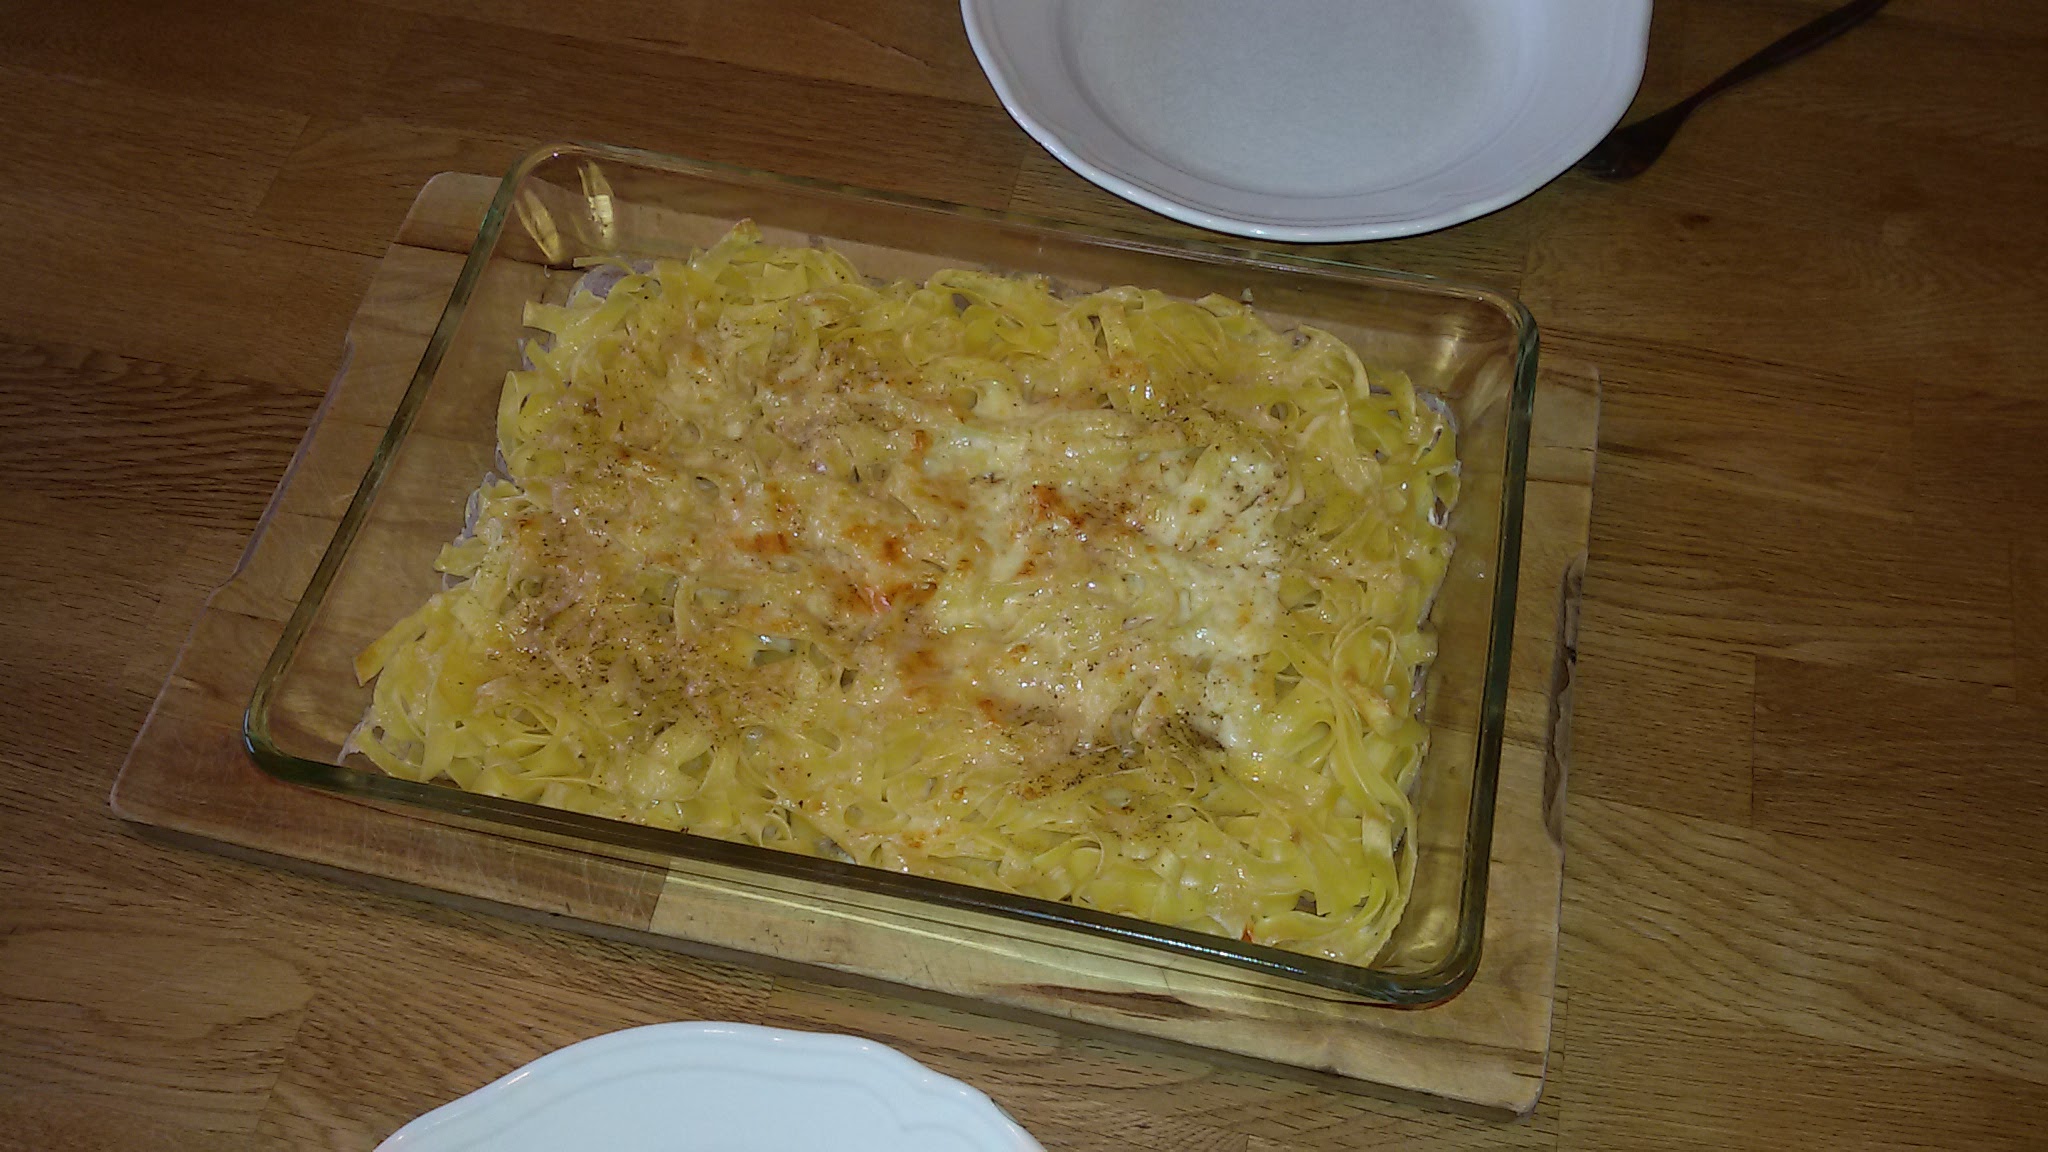 Pasta gratinated with cheese